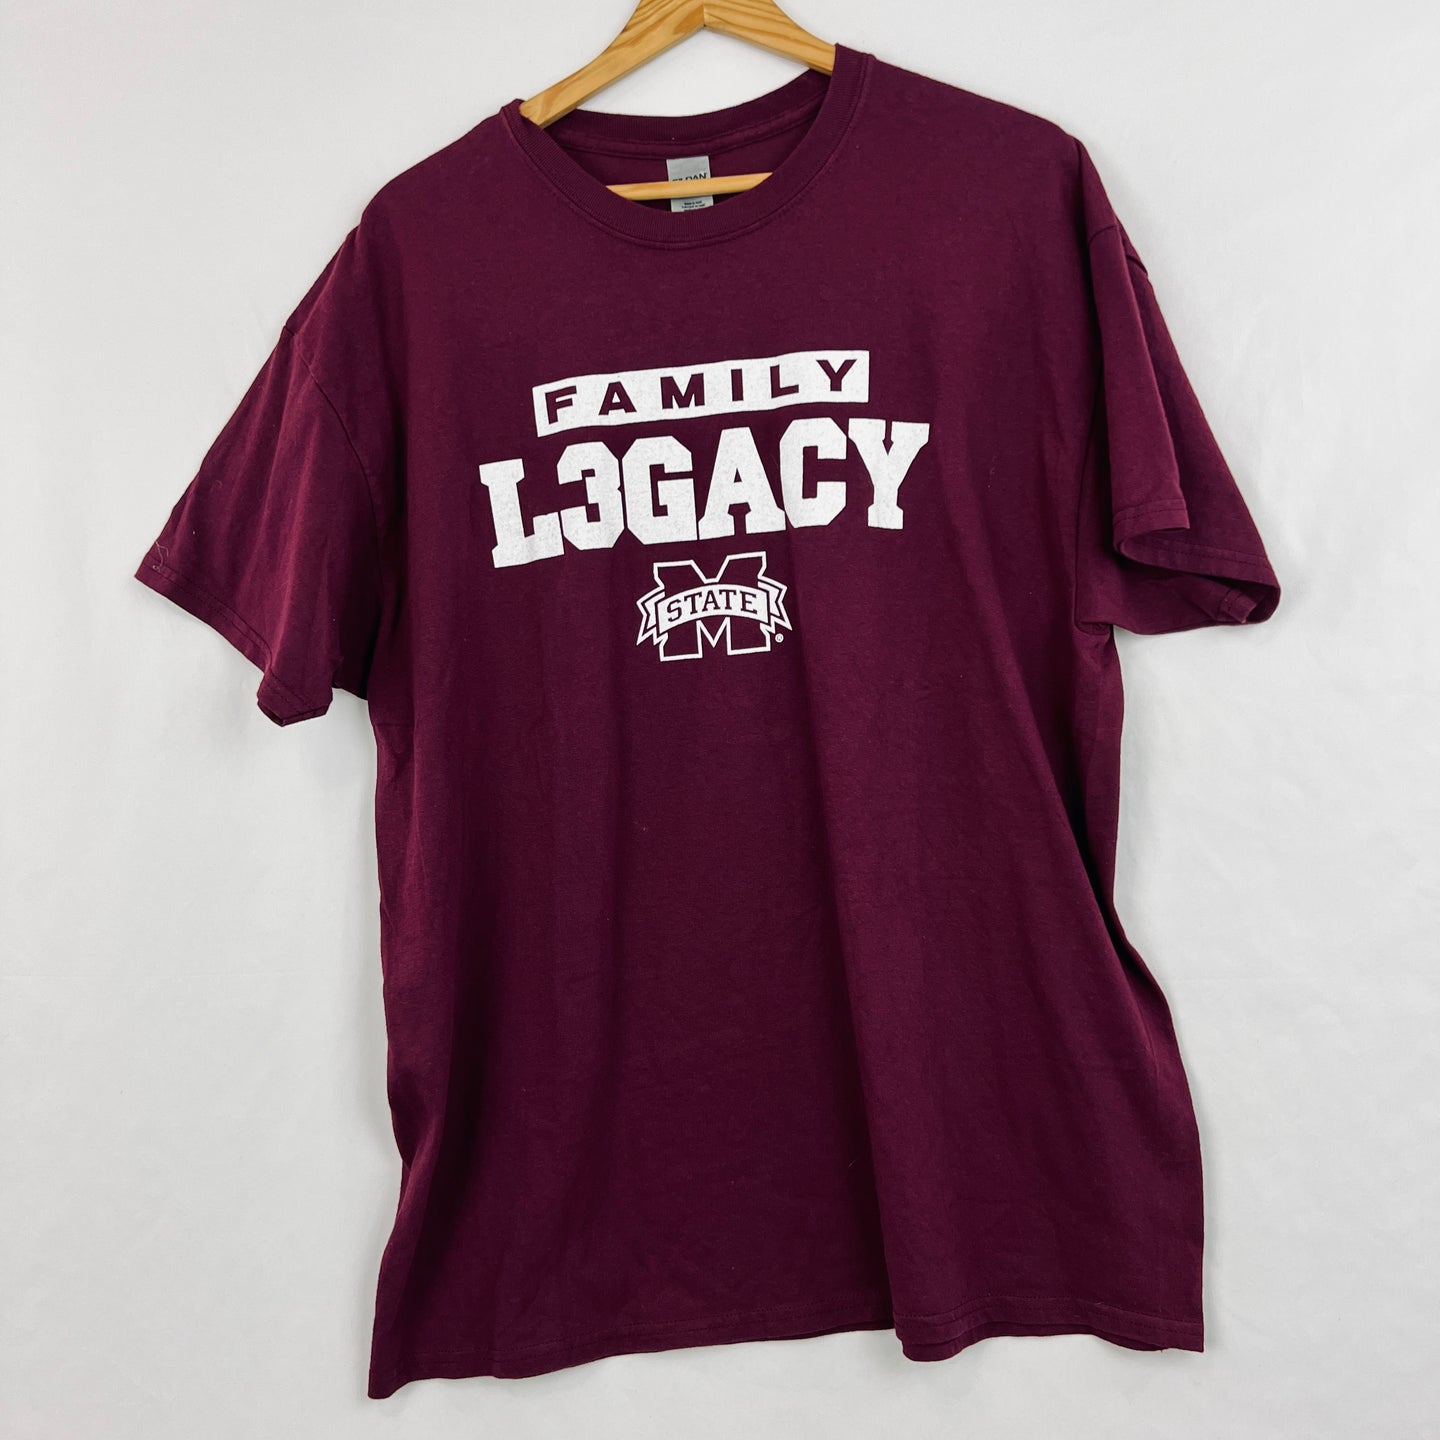 Mississippi State University Family Legacy Tee Shirt Size XL Chest 46